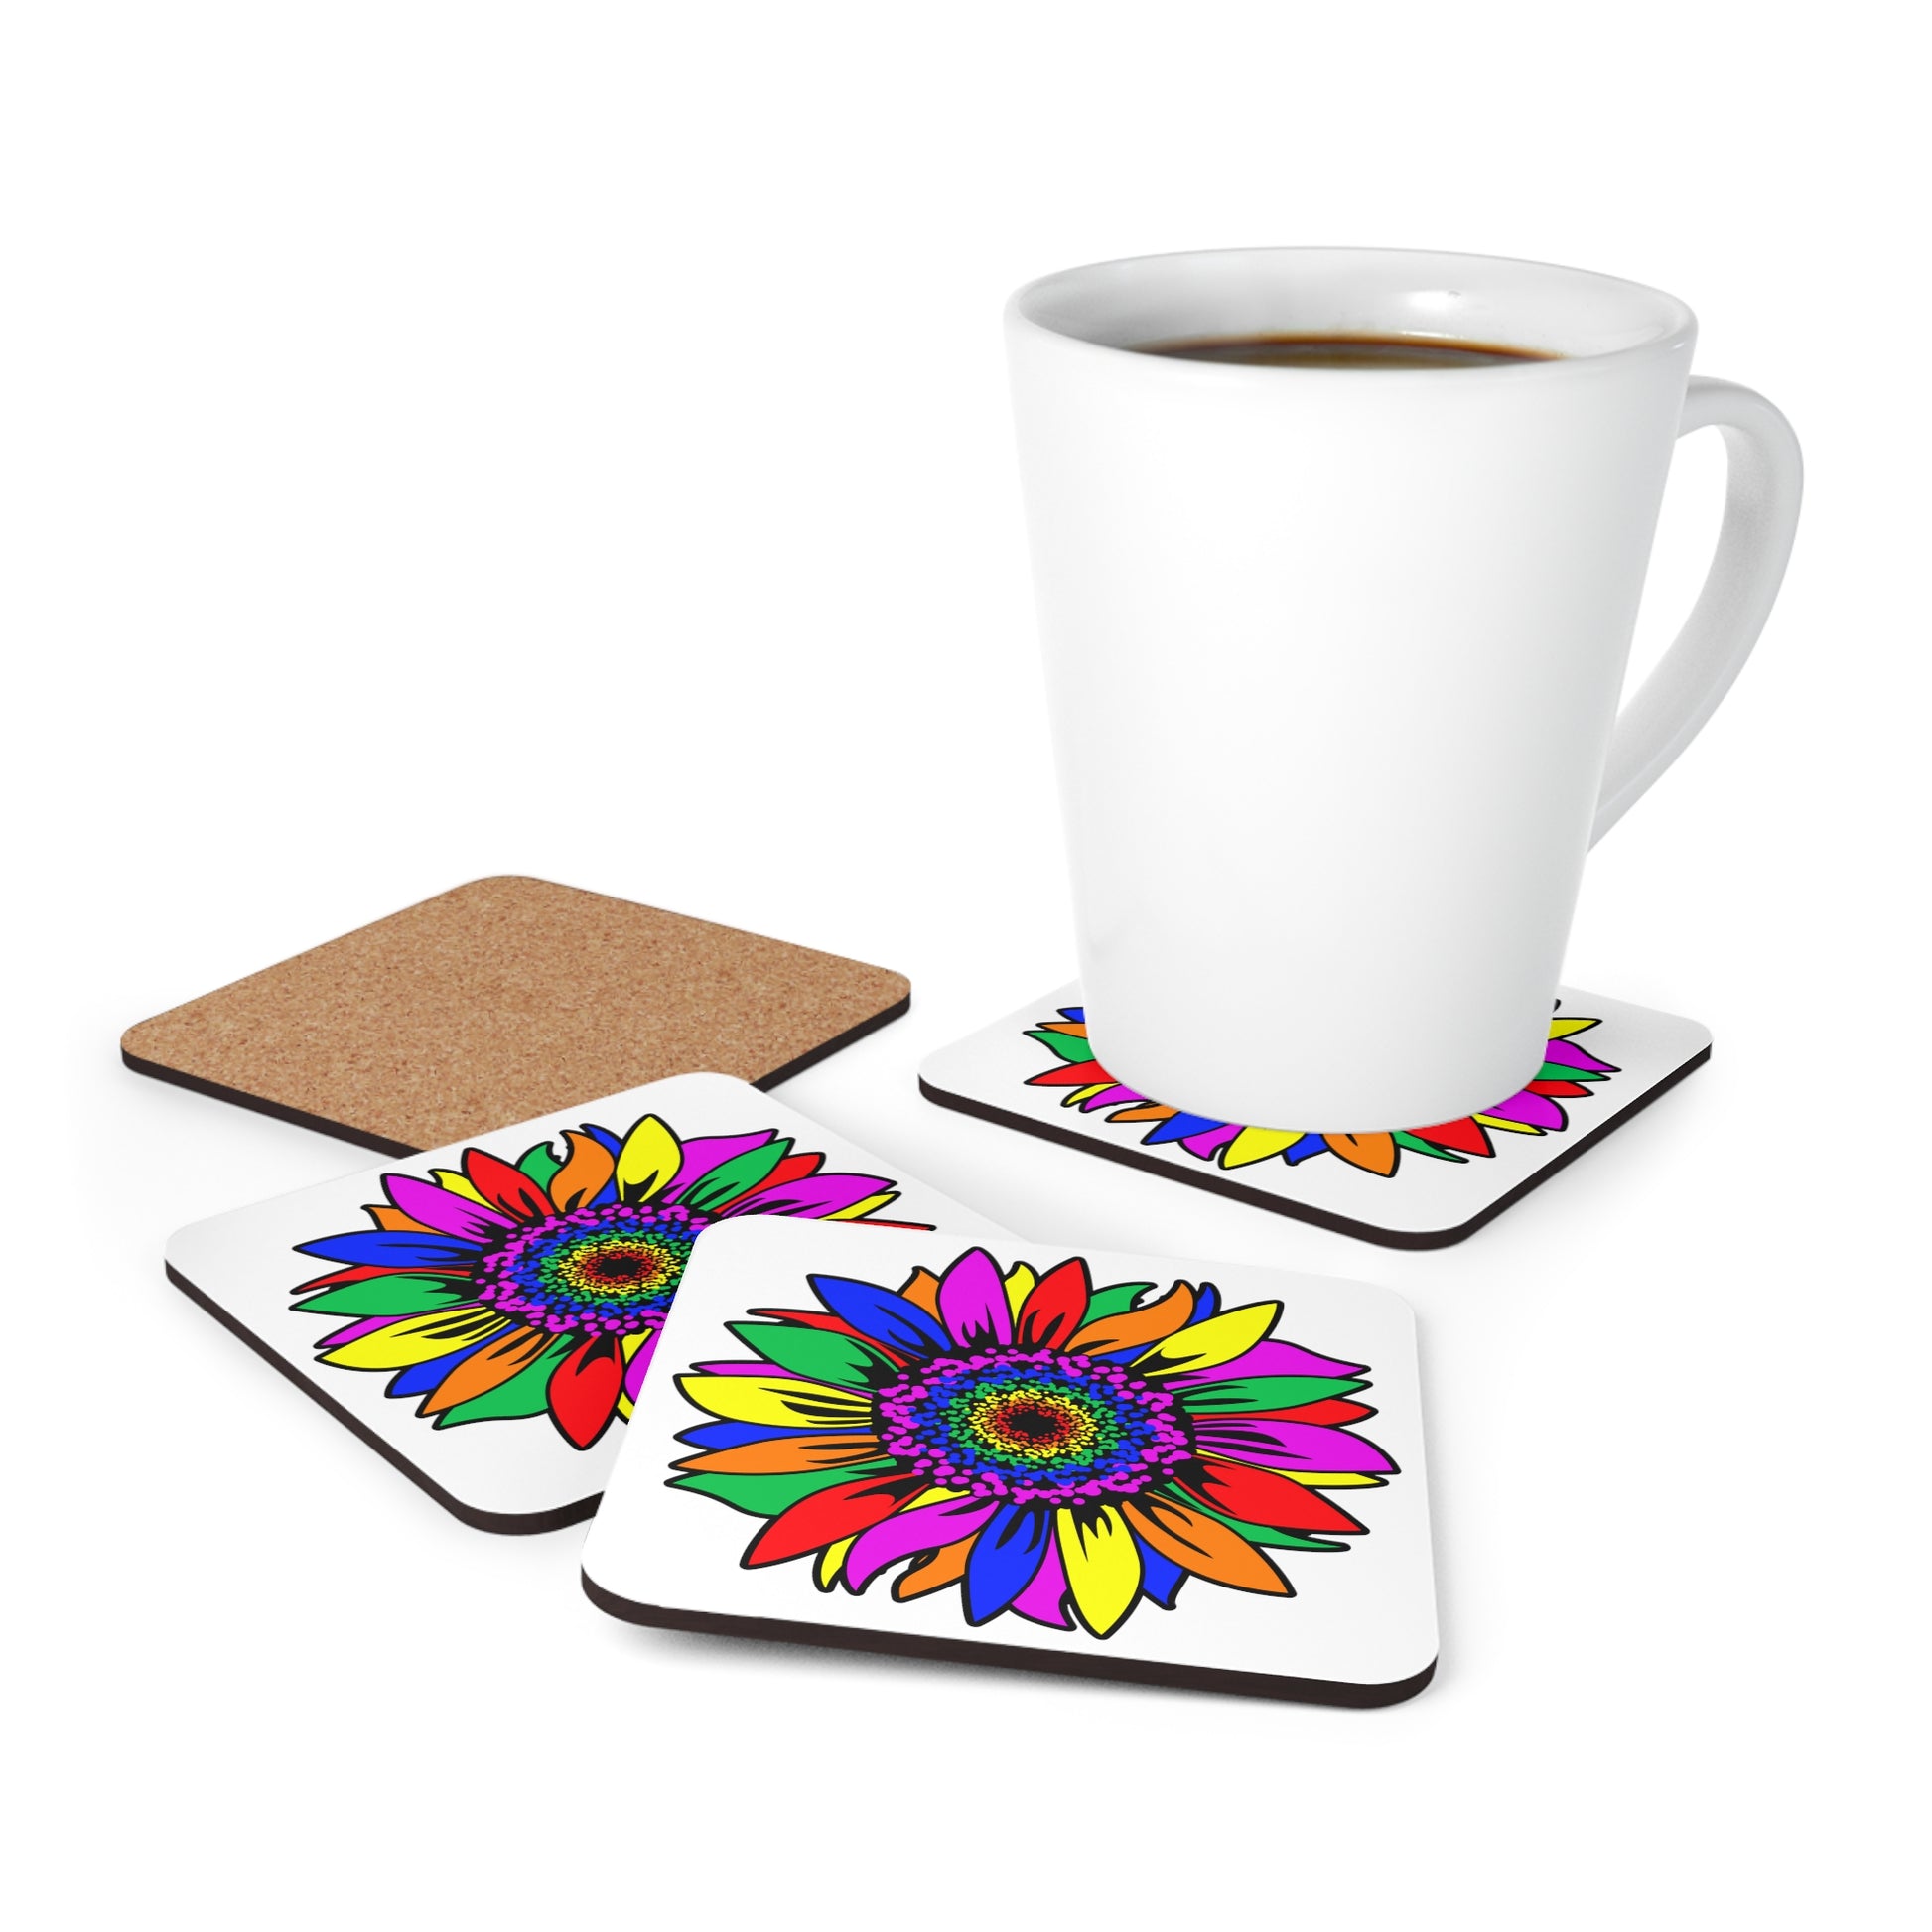 Mock up of a Latte mug with the 4 coasters